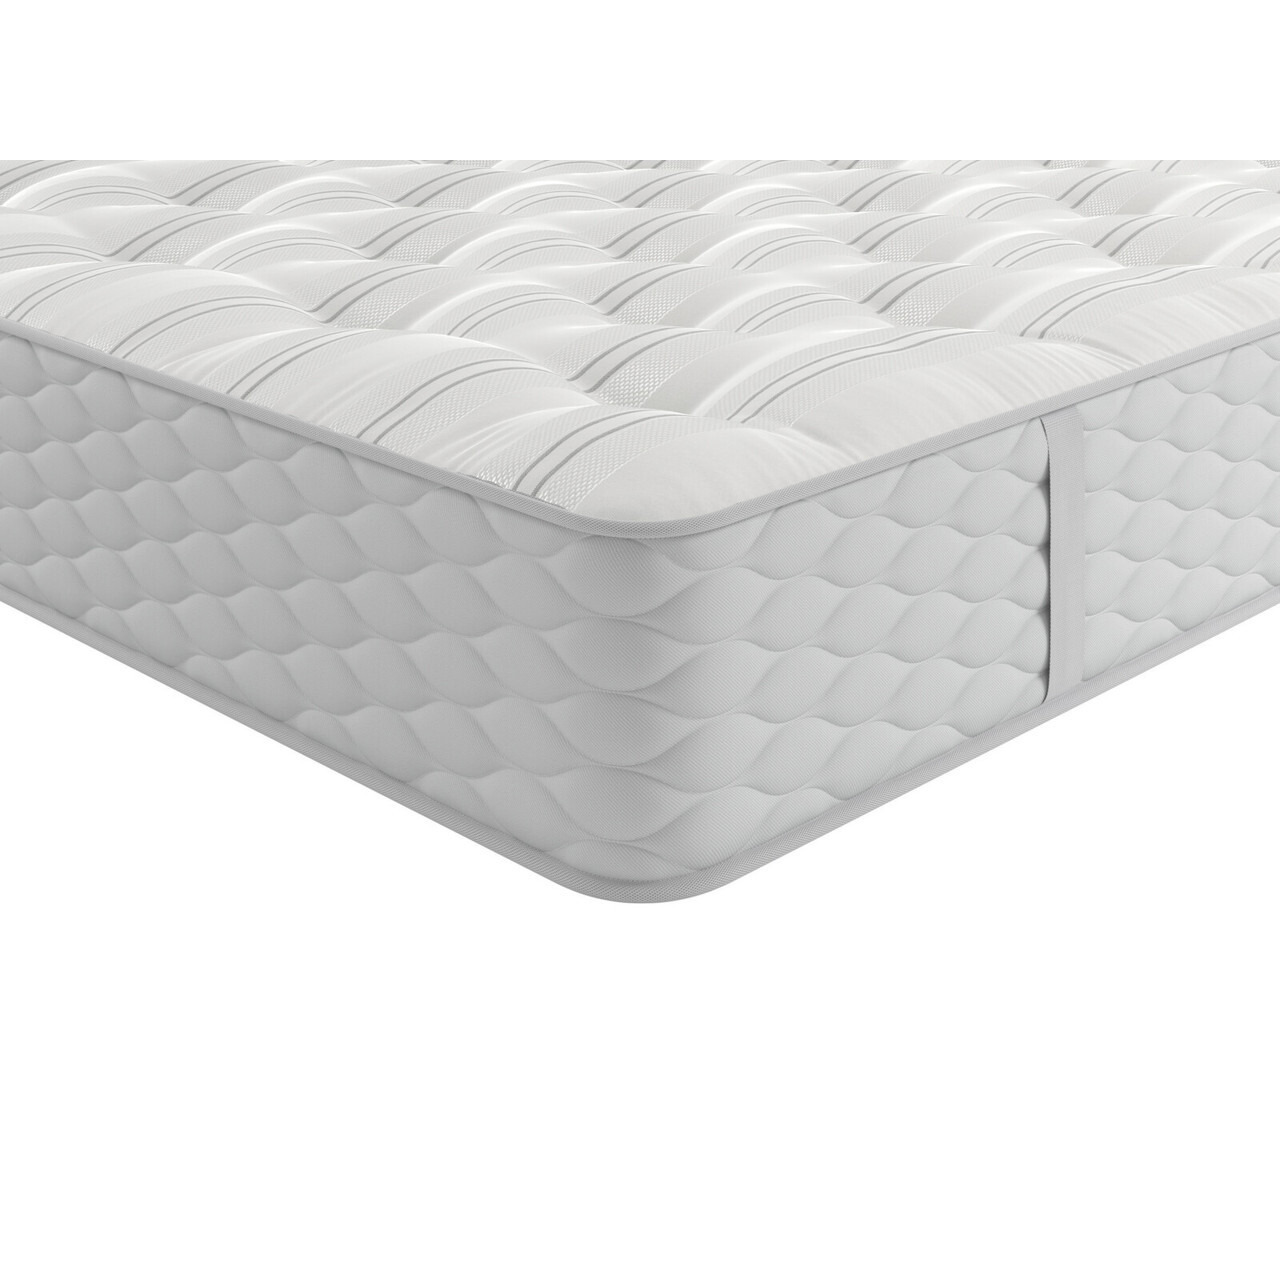 Sealy Fremont Backcare Extra Firm Mattress - image 1